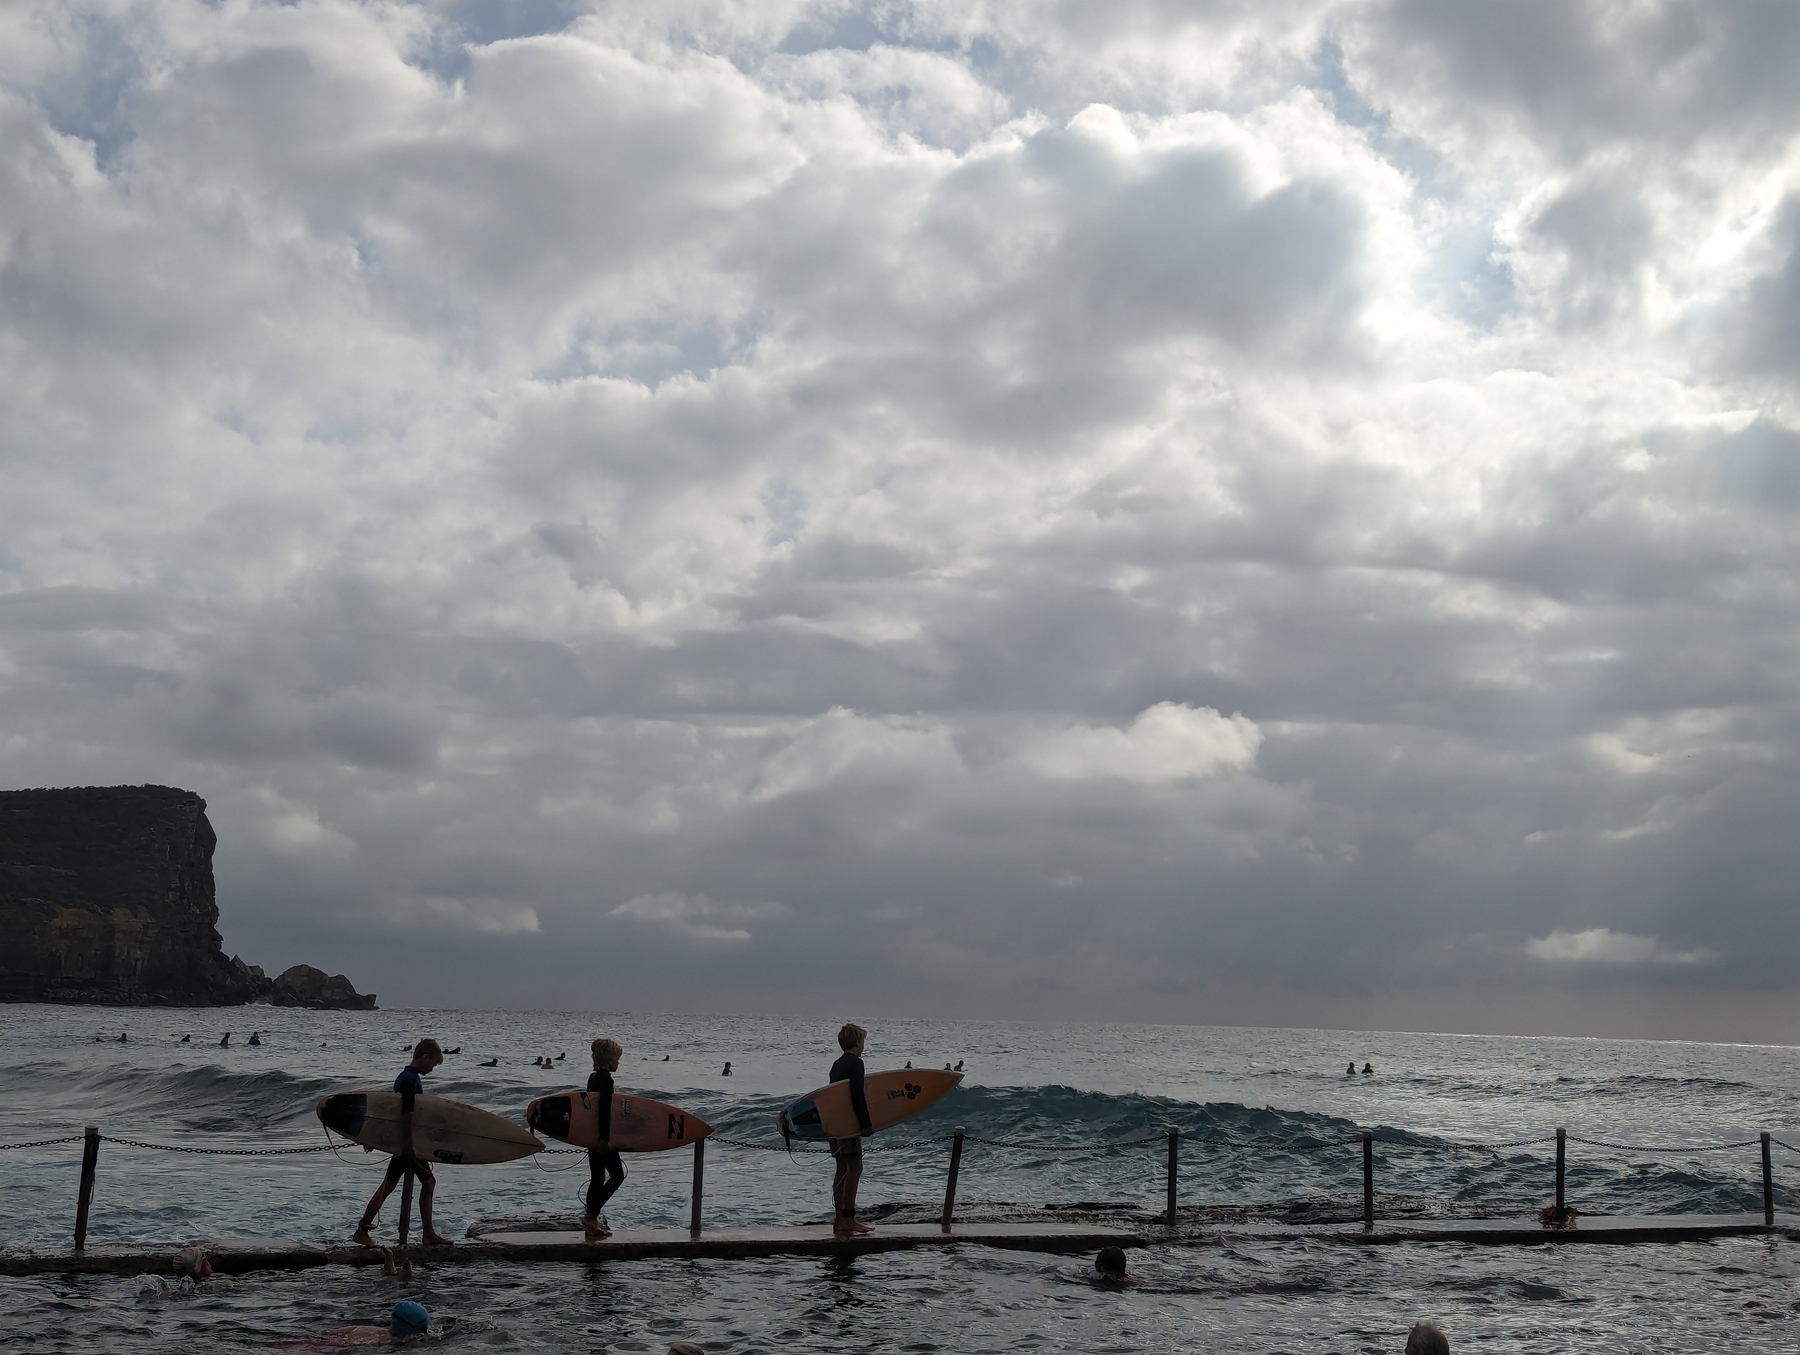 Three kids walking in a row with surf boards, with a stormy sky behind them.